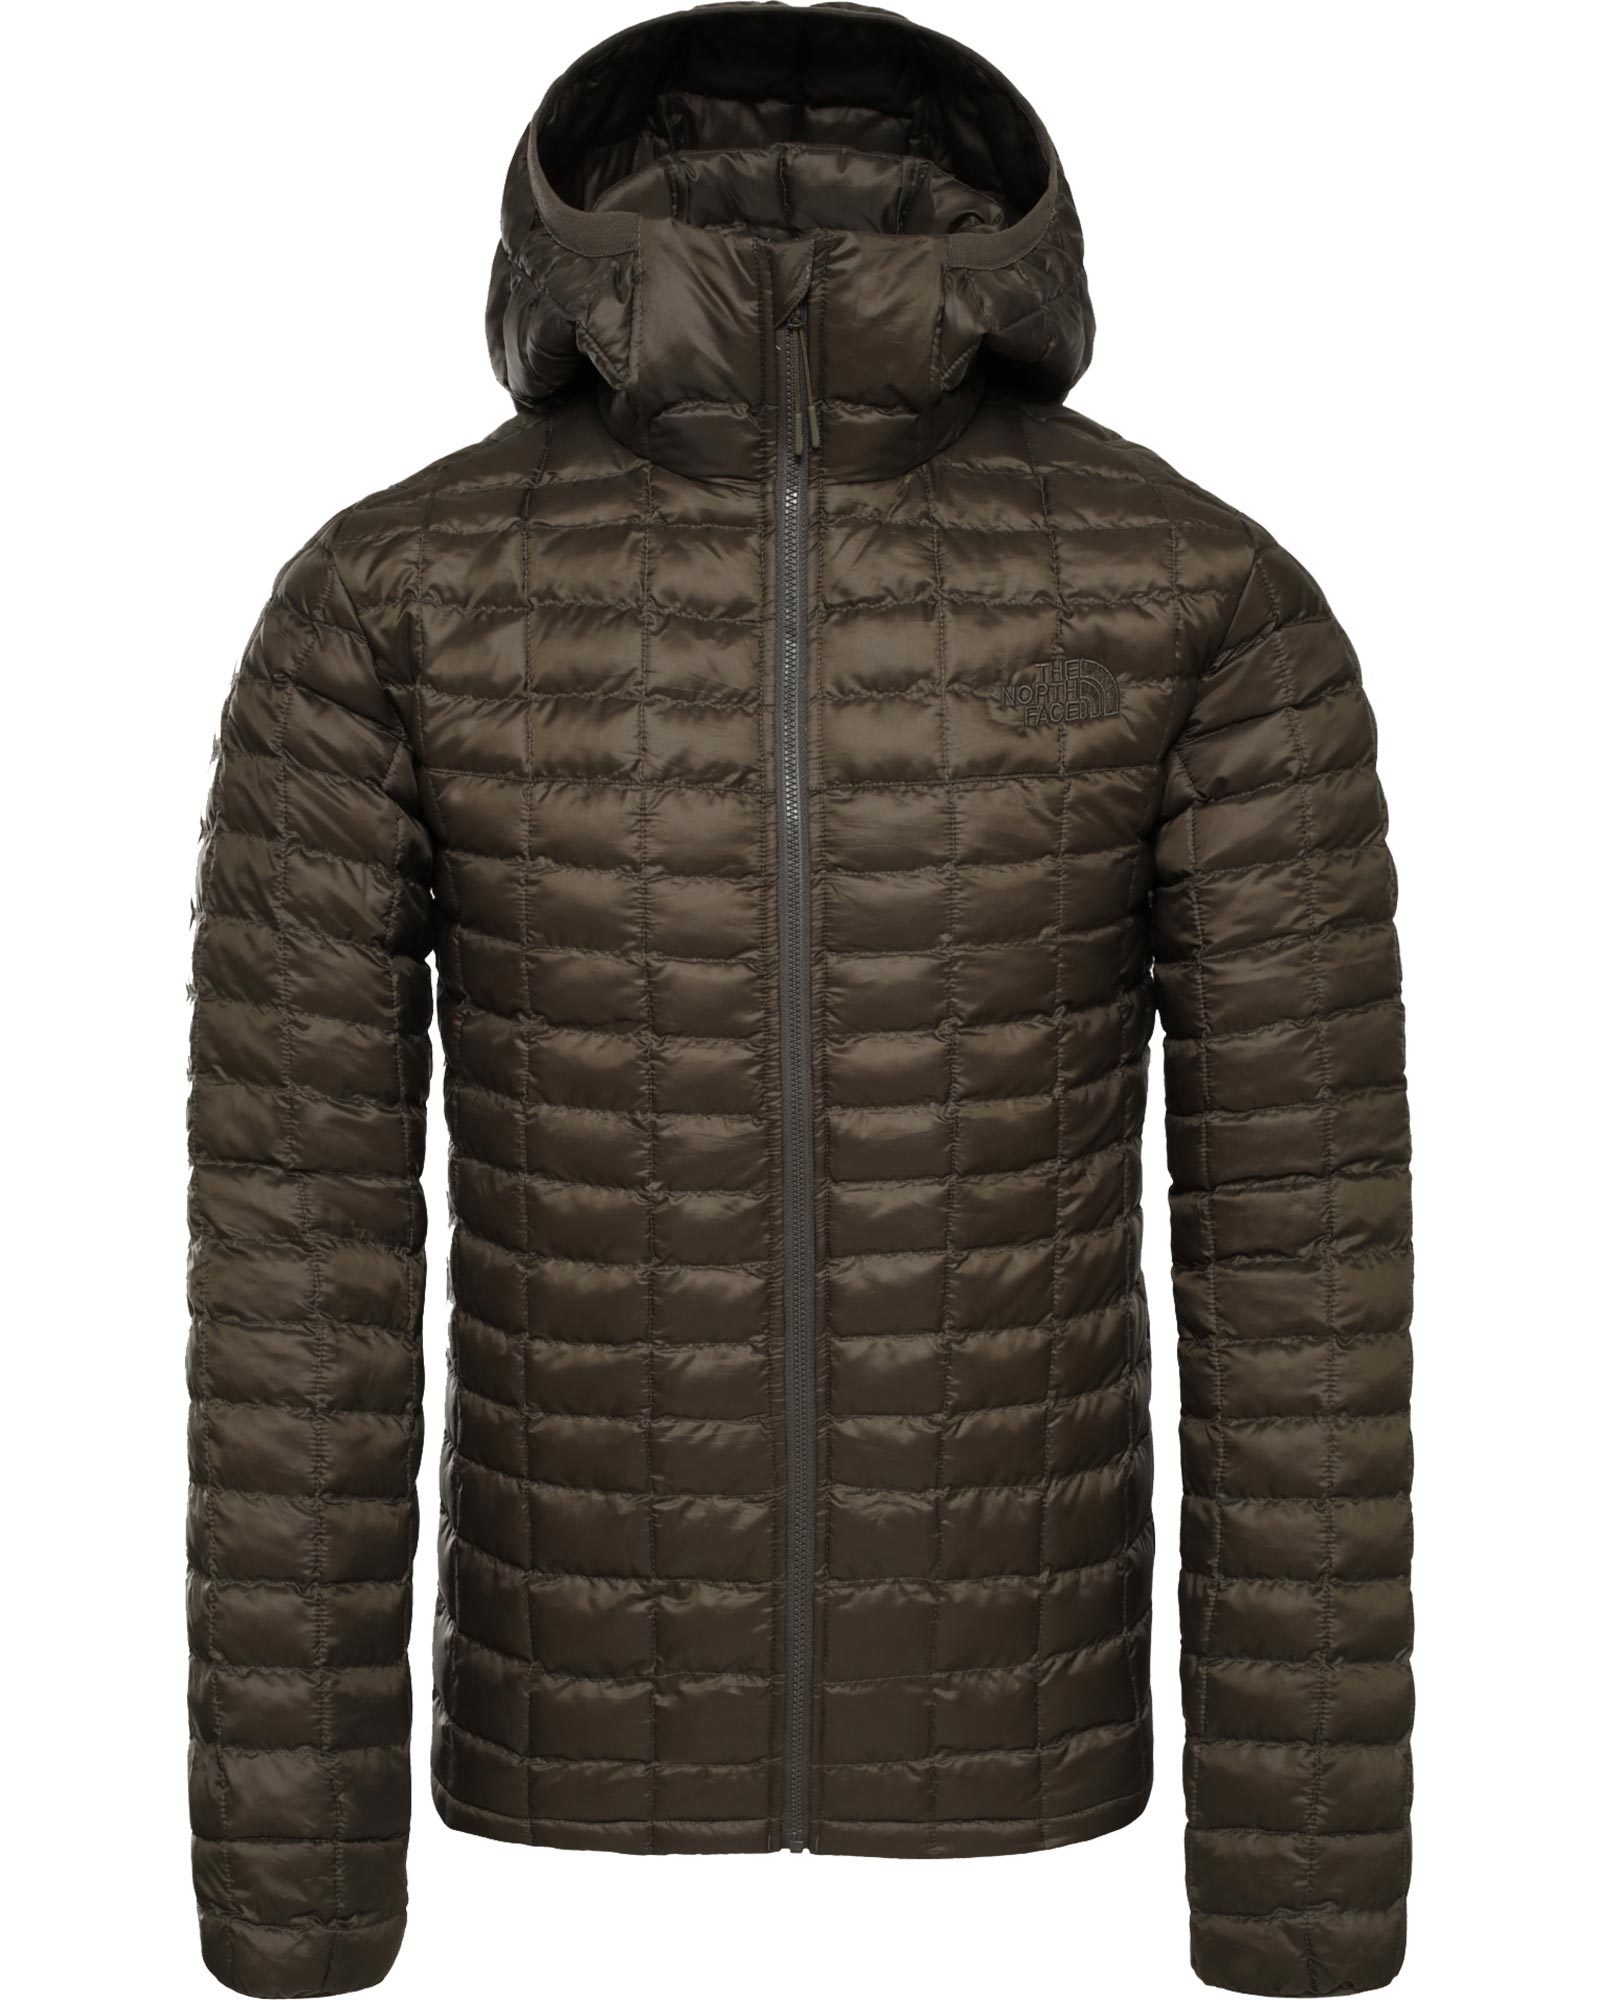 Product image of The North Face ThermoBall eco Men's Packable Hooded Jacket